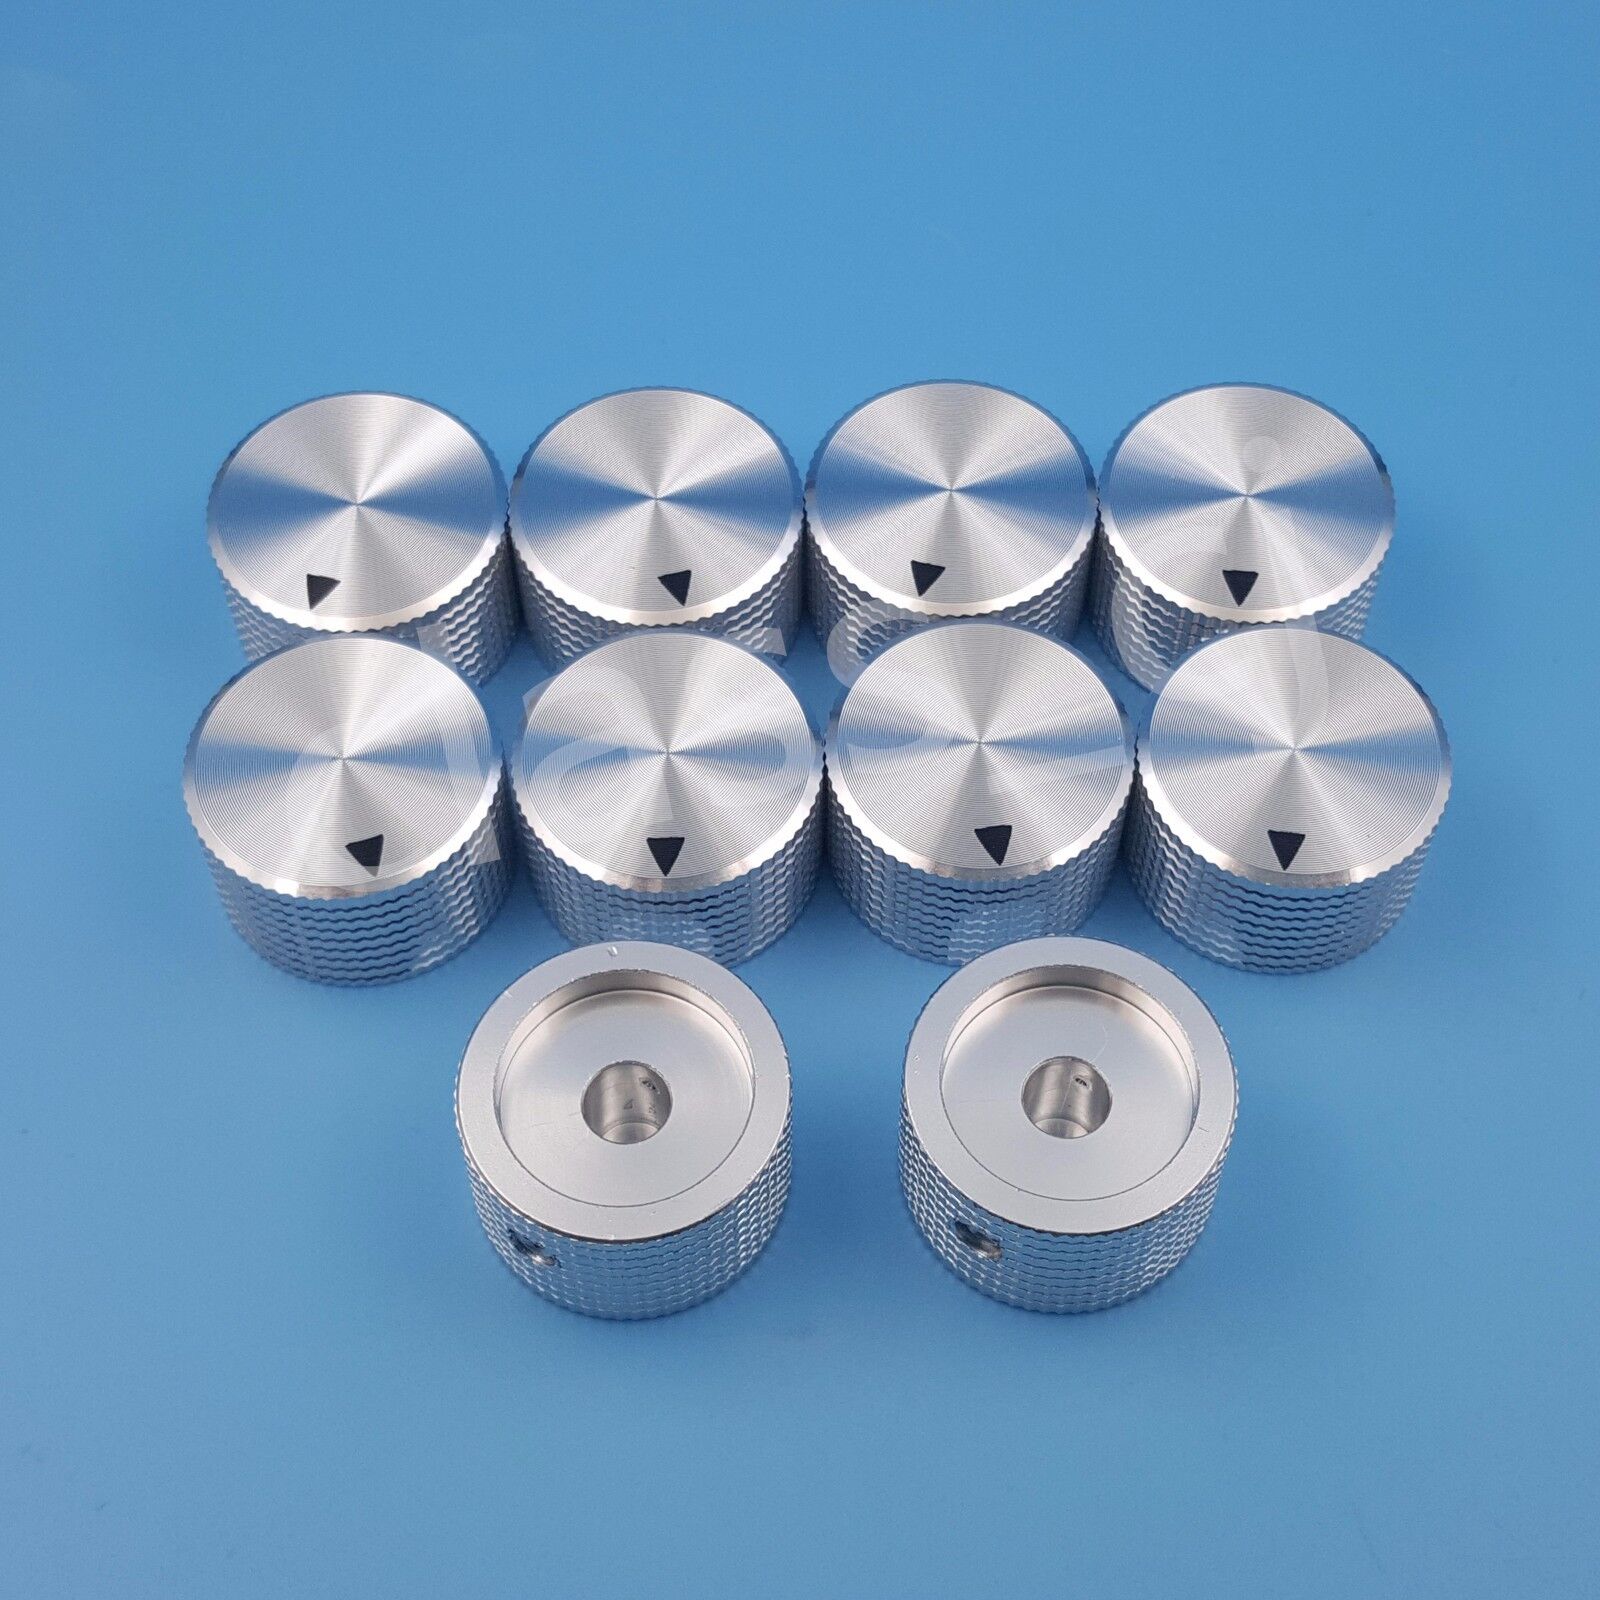 10Pcs 6.4mm 1/4'' Silver Aluminum 25 x 15.5mm Amplifier Audio Volume Rotary Knob Unbranded/Generic Does Not Apply